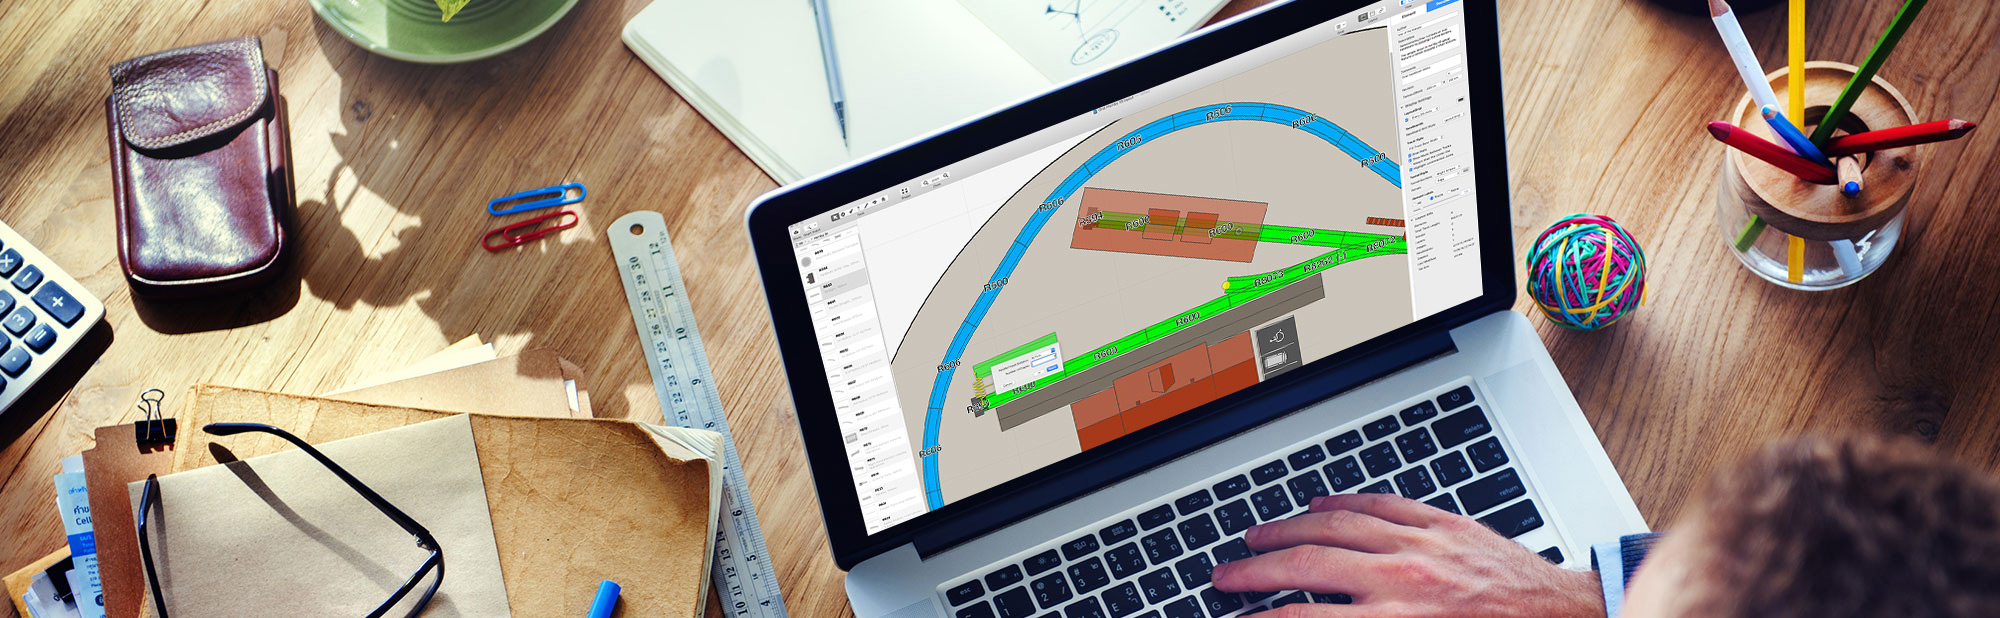 ho track planning software for mac